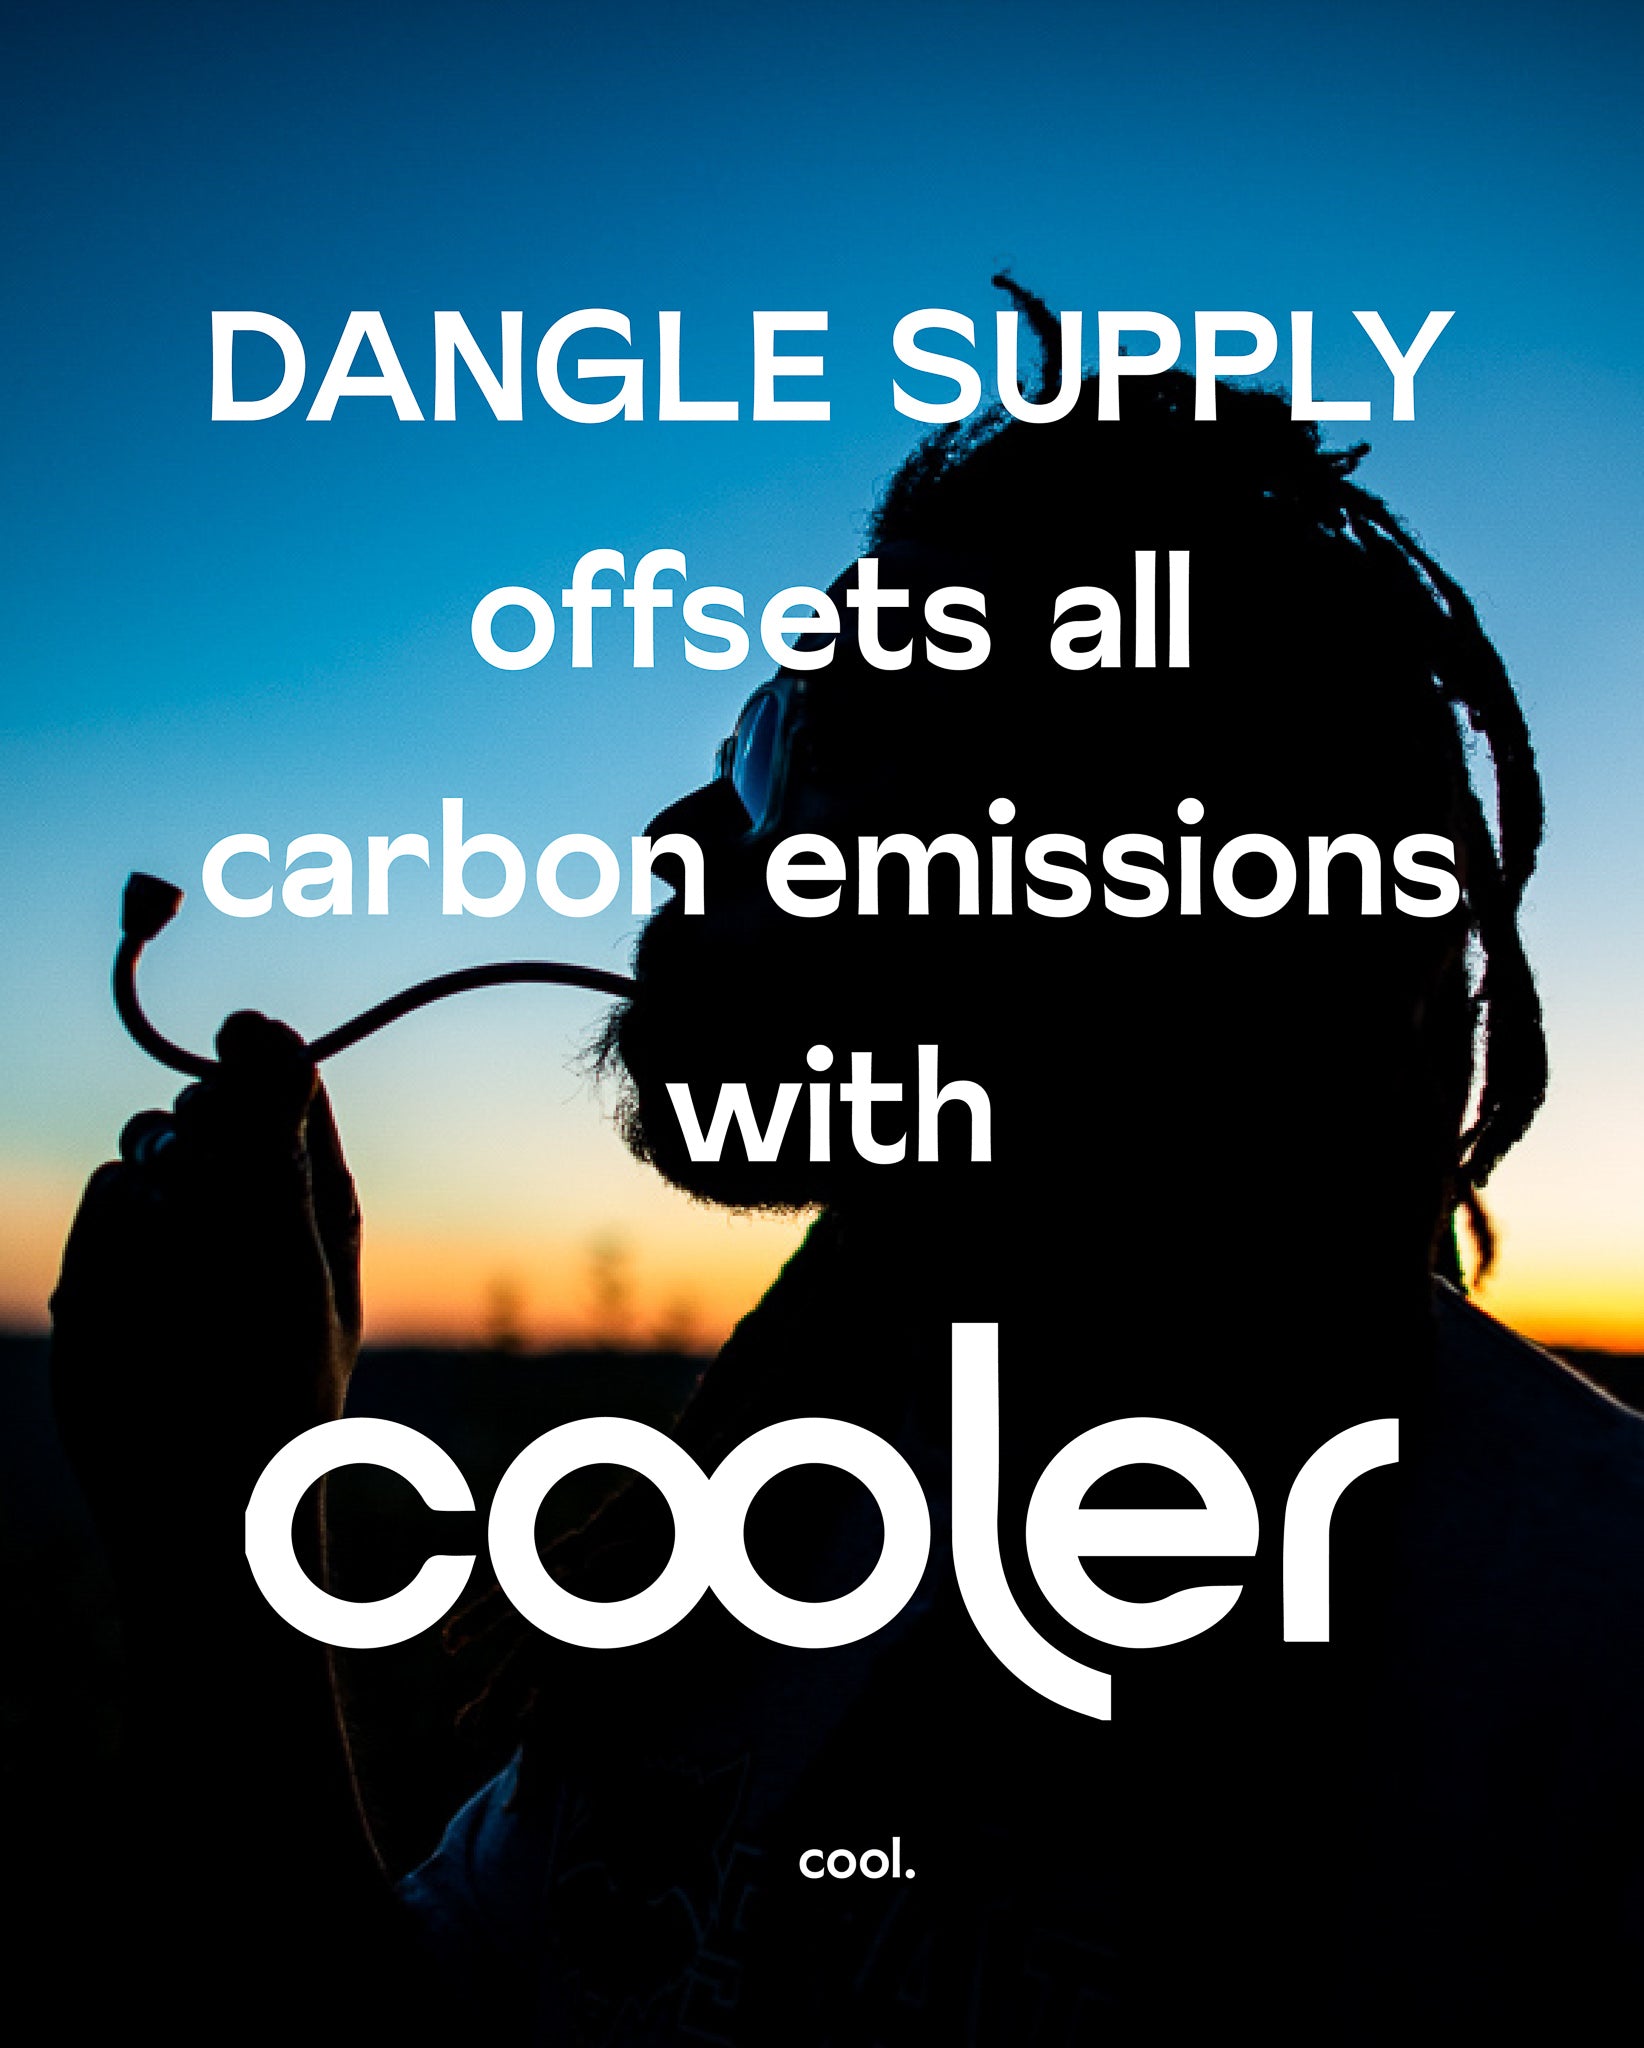 Dangle Supply Offsets Carbon Footprint, Partnering with Cooler!